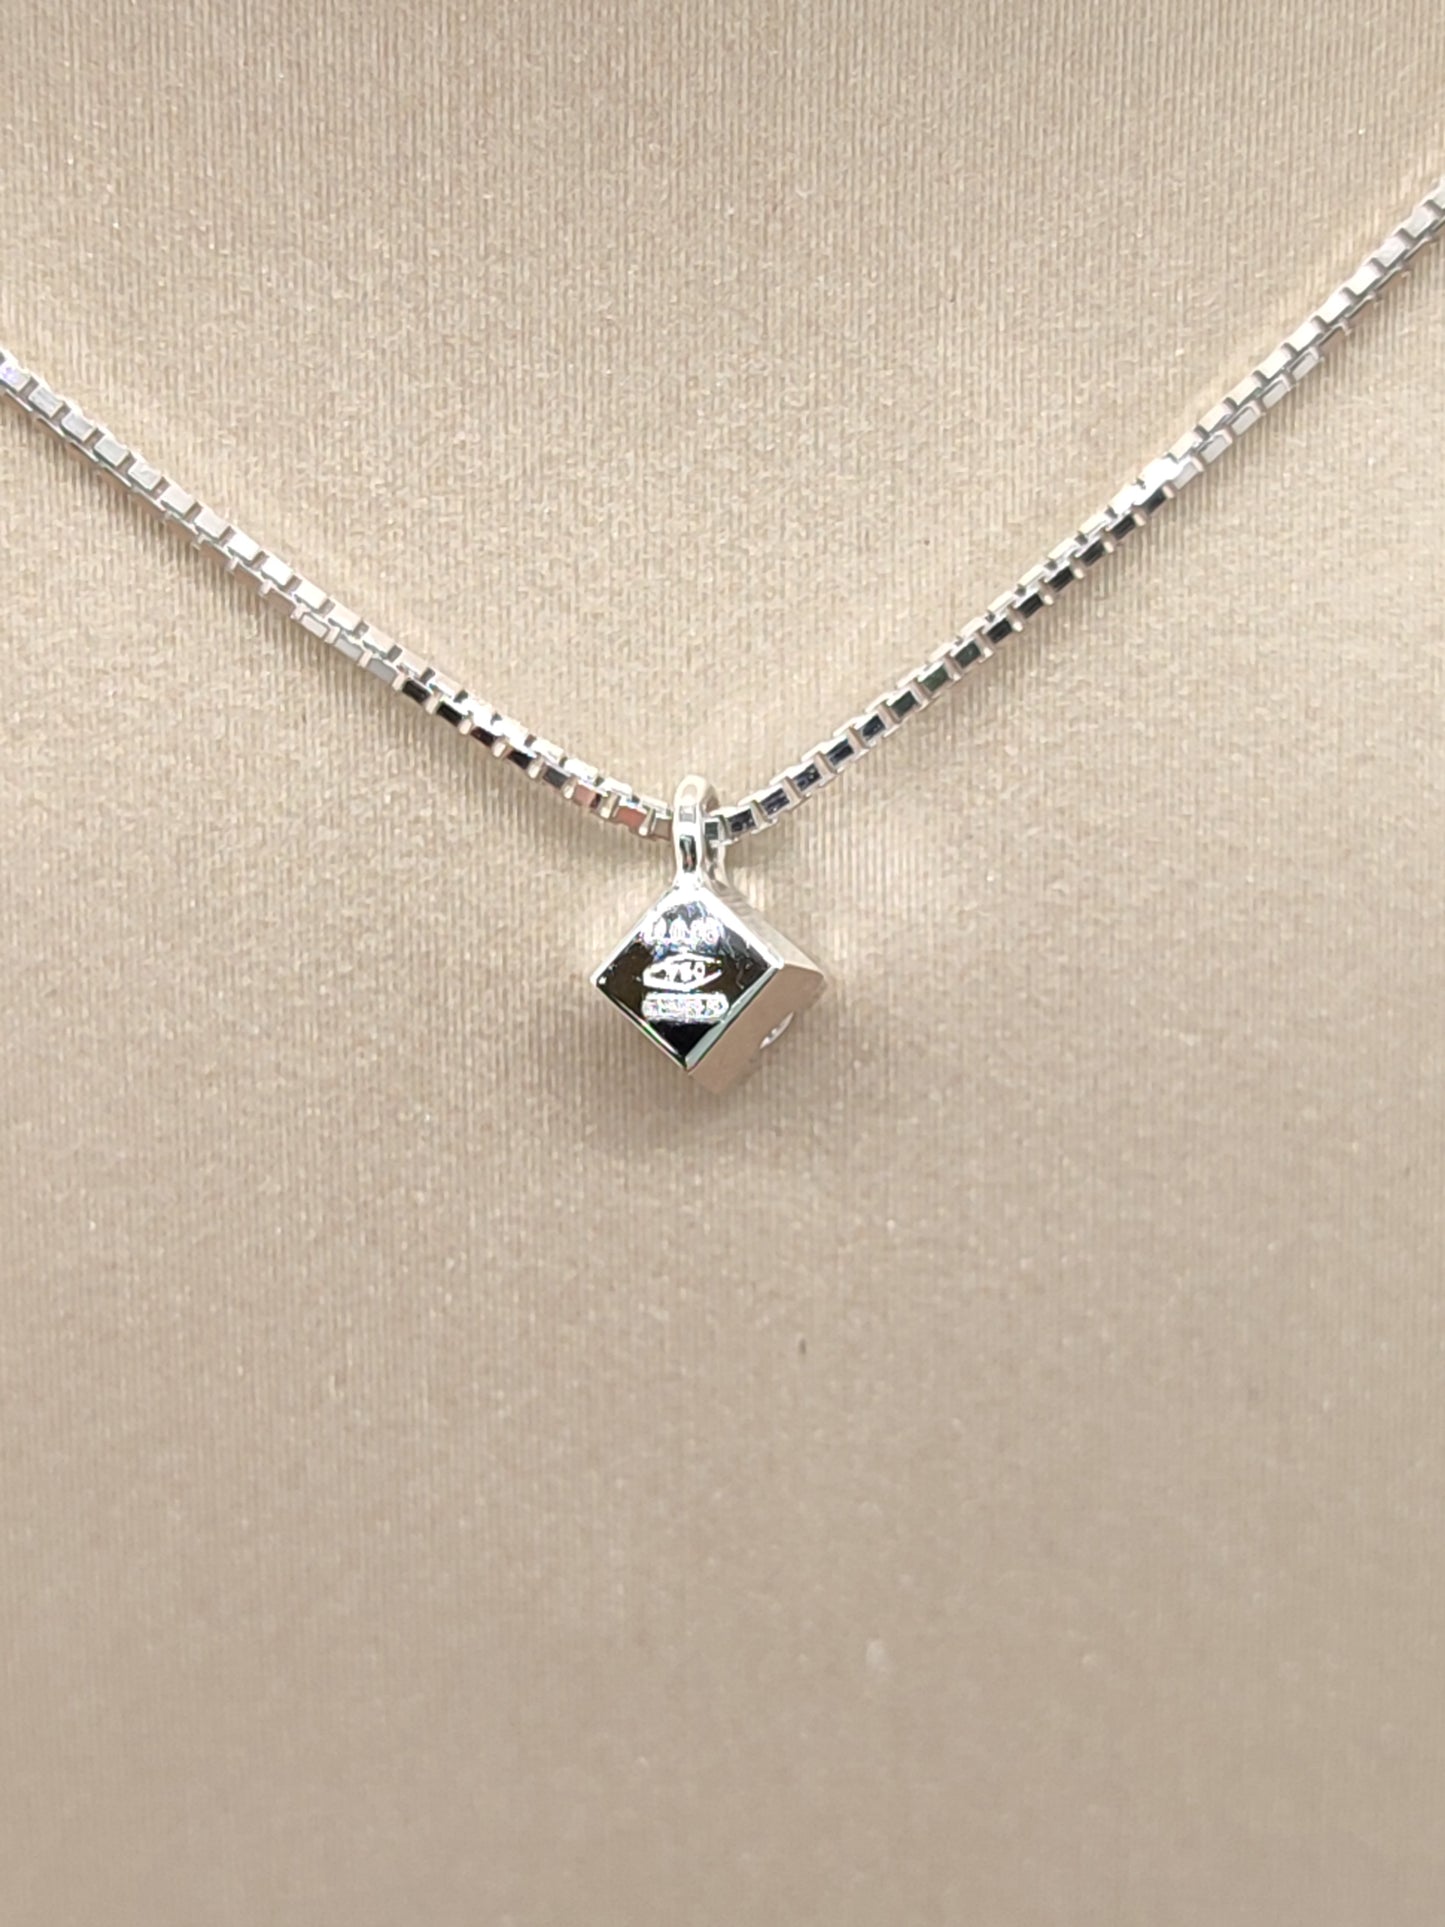 Gold necklace with 0.05ct light point diamond